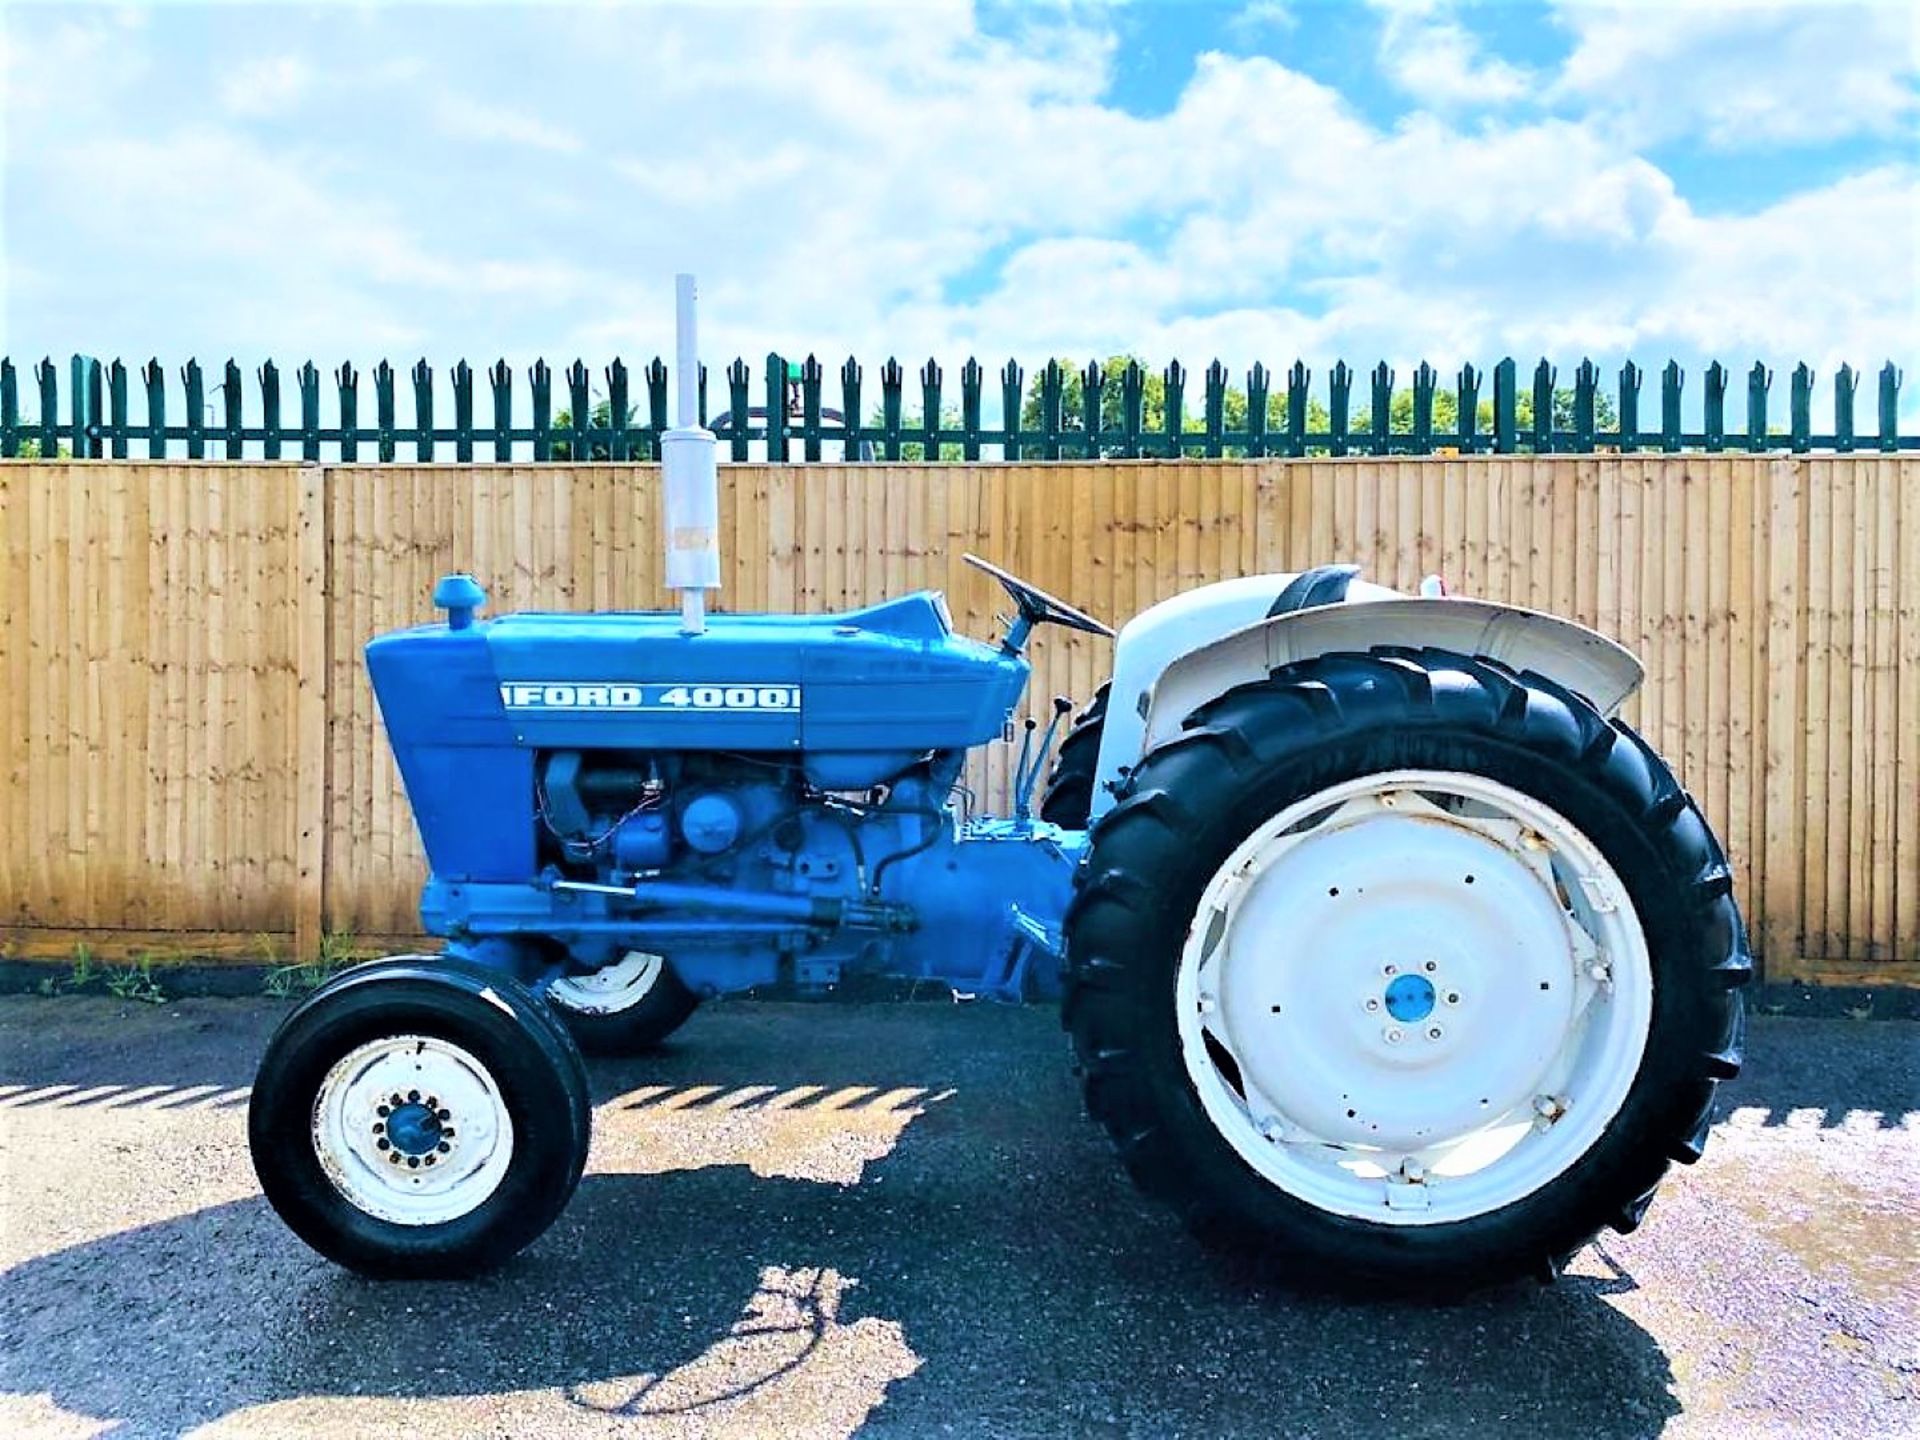 1969, FORD 4000 TRACTOR - Image 9 of 19